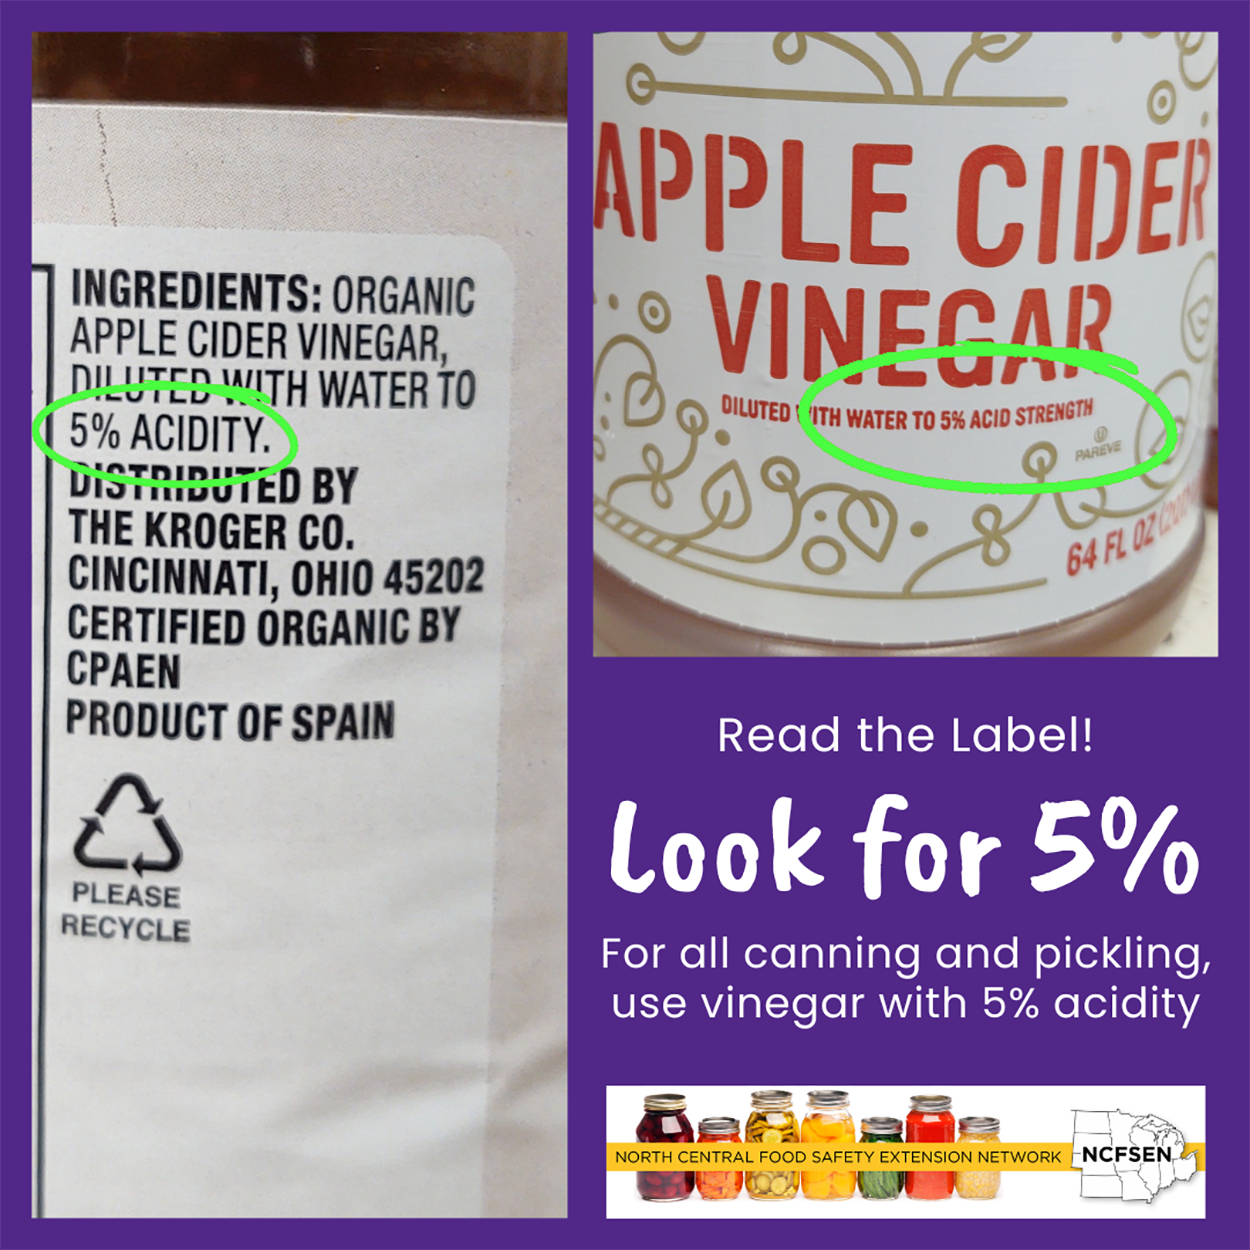 Infographic. Two vinegar labels with 5% acidity text circled. Text: Read the label. Look for 5%. For all canning and pickling, use vinegar with 5% acidity.